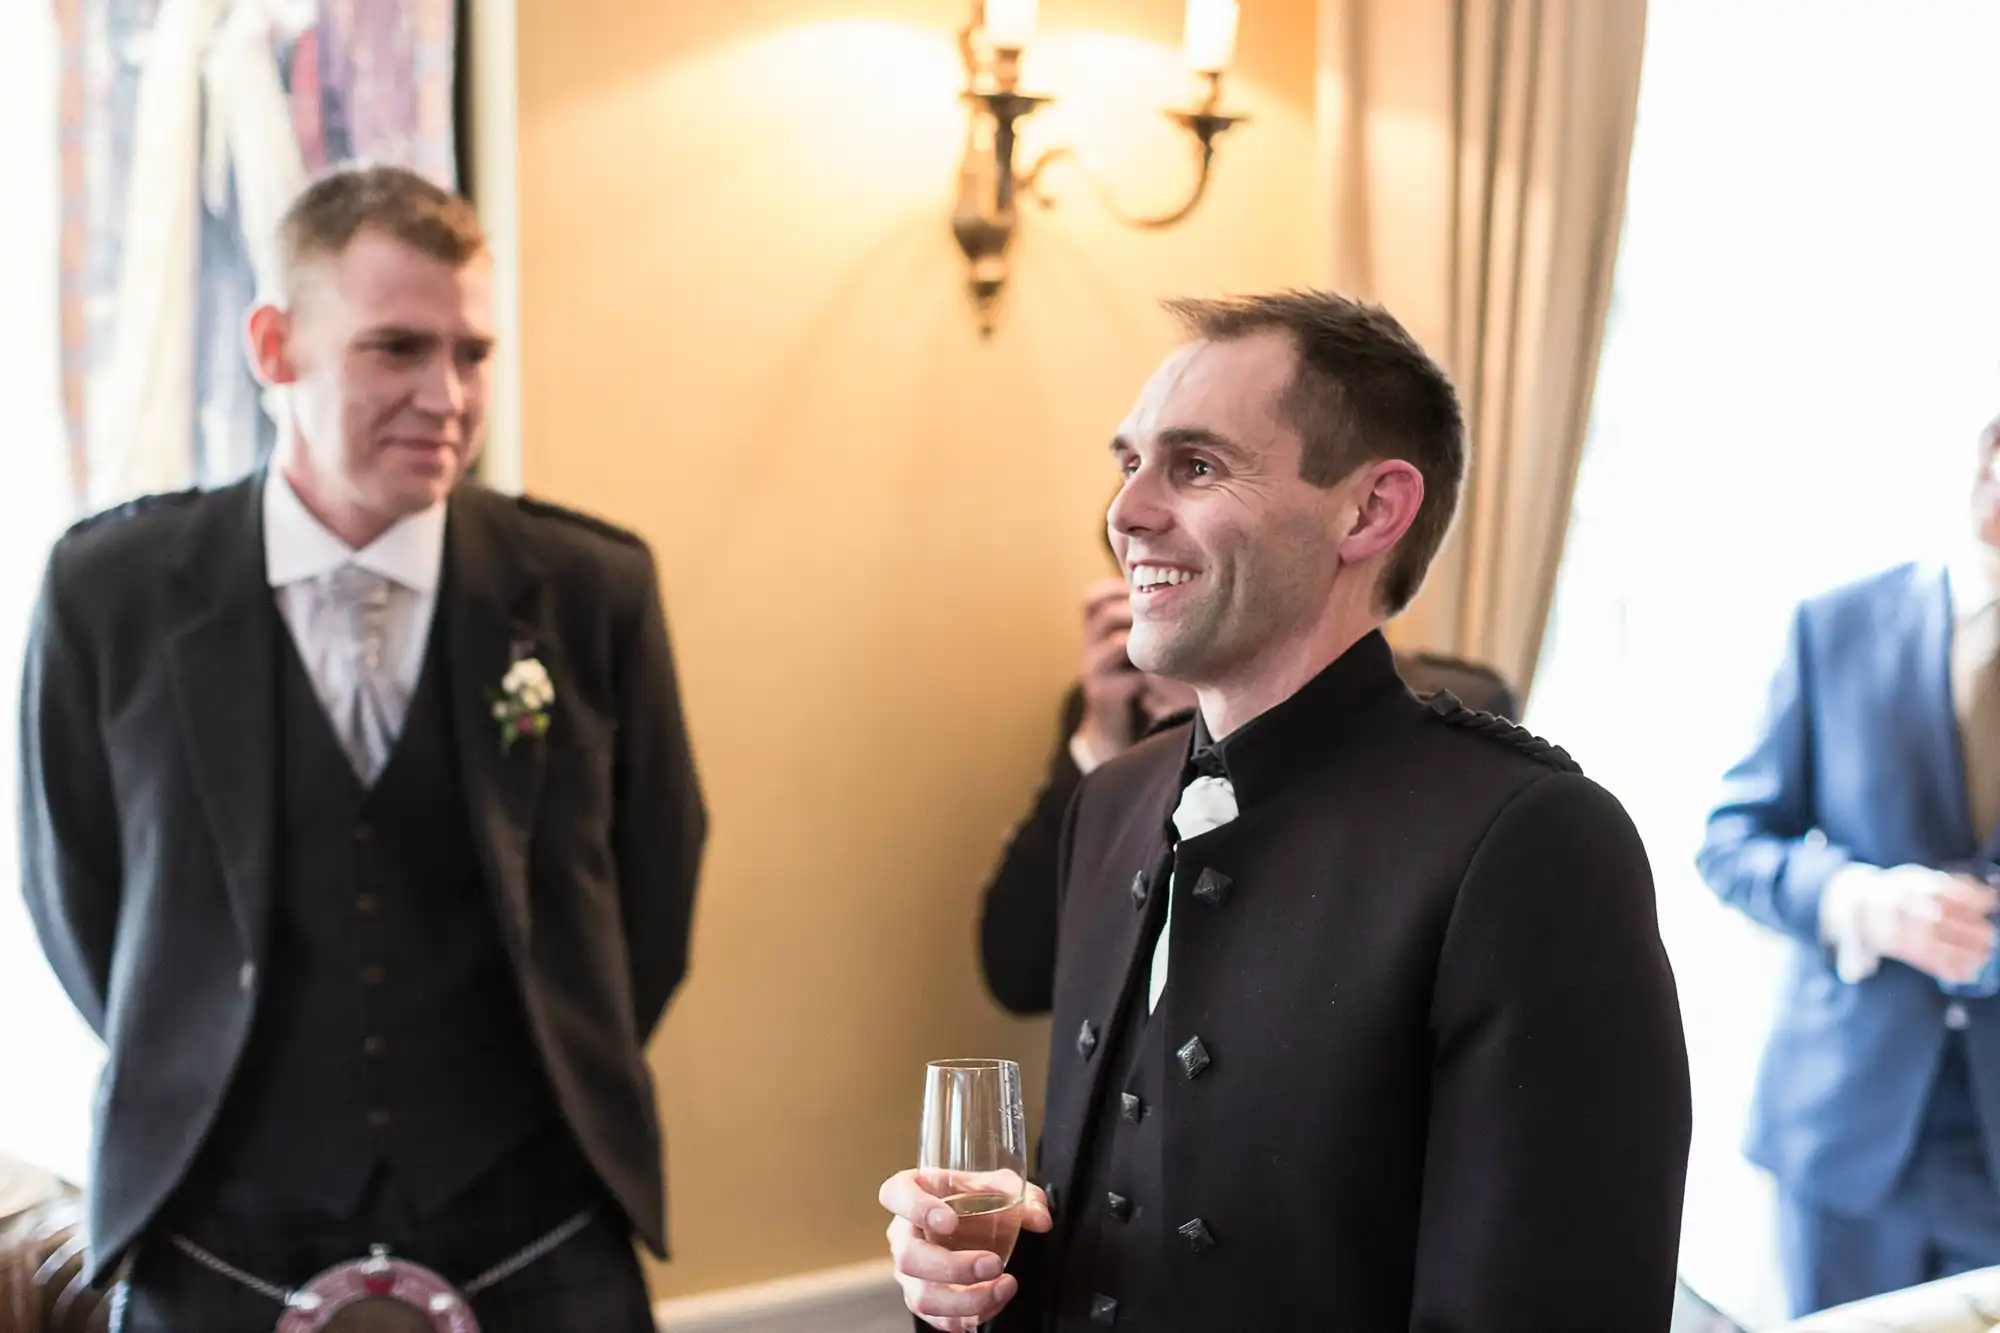 Two men in formal attire at an indoor event, one holding a champagne glass and smiling, with elegant lighting in the background.